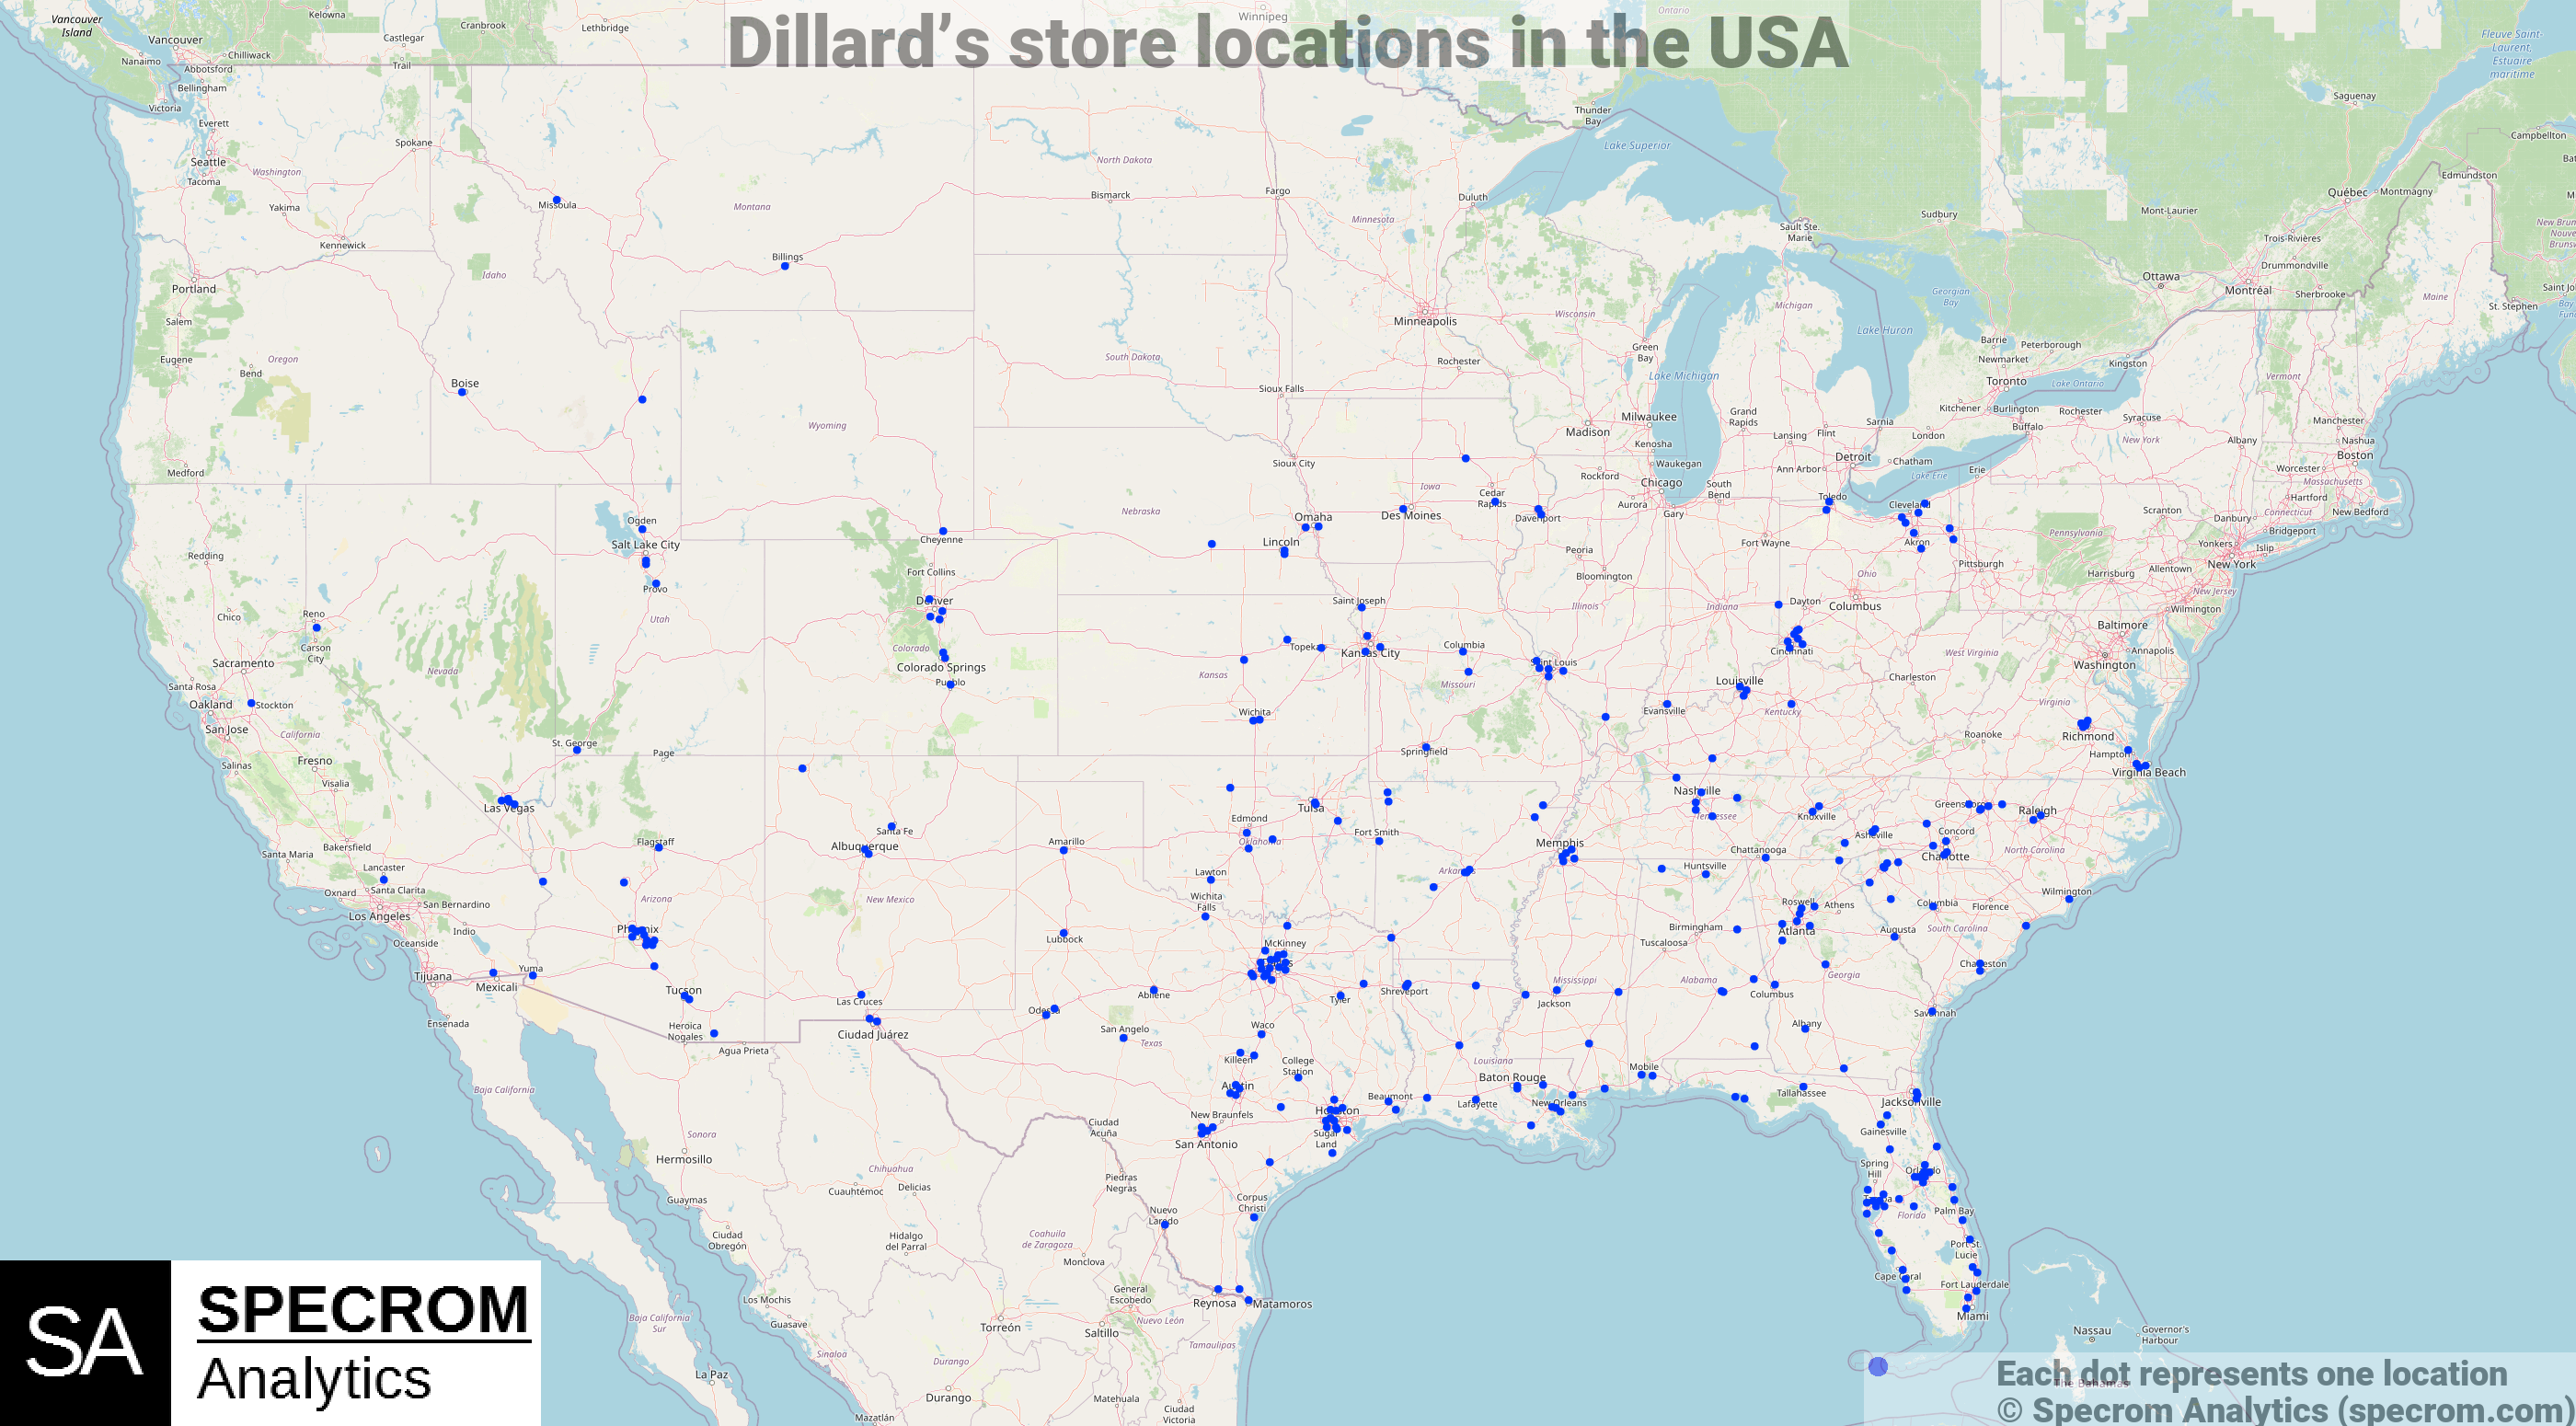 Dillard's store locations in the USA